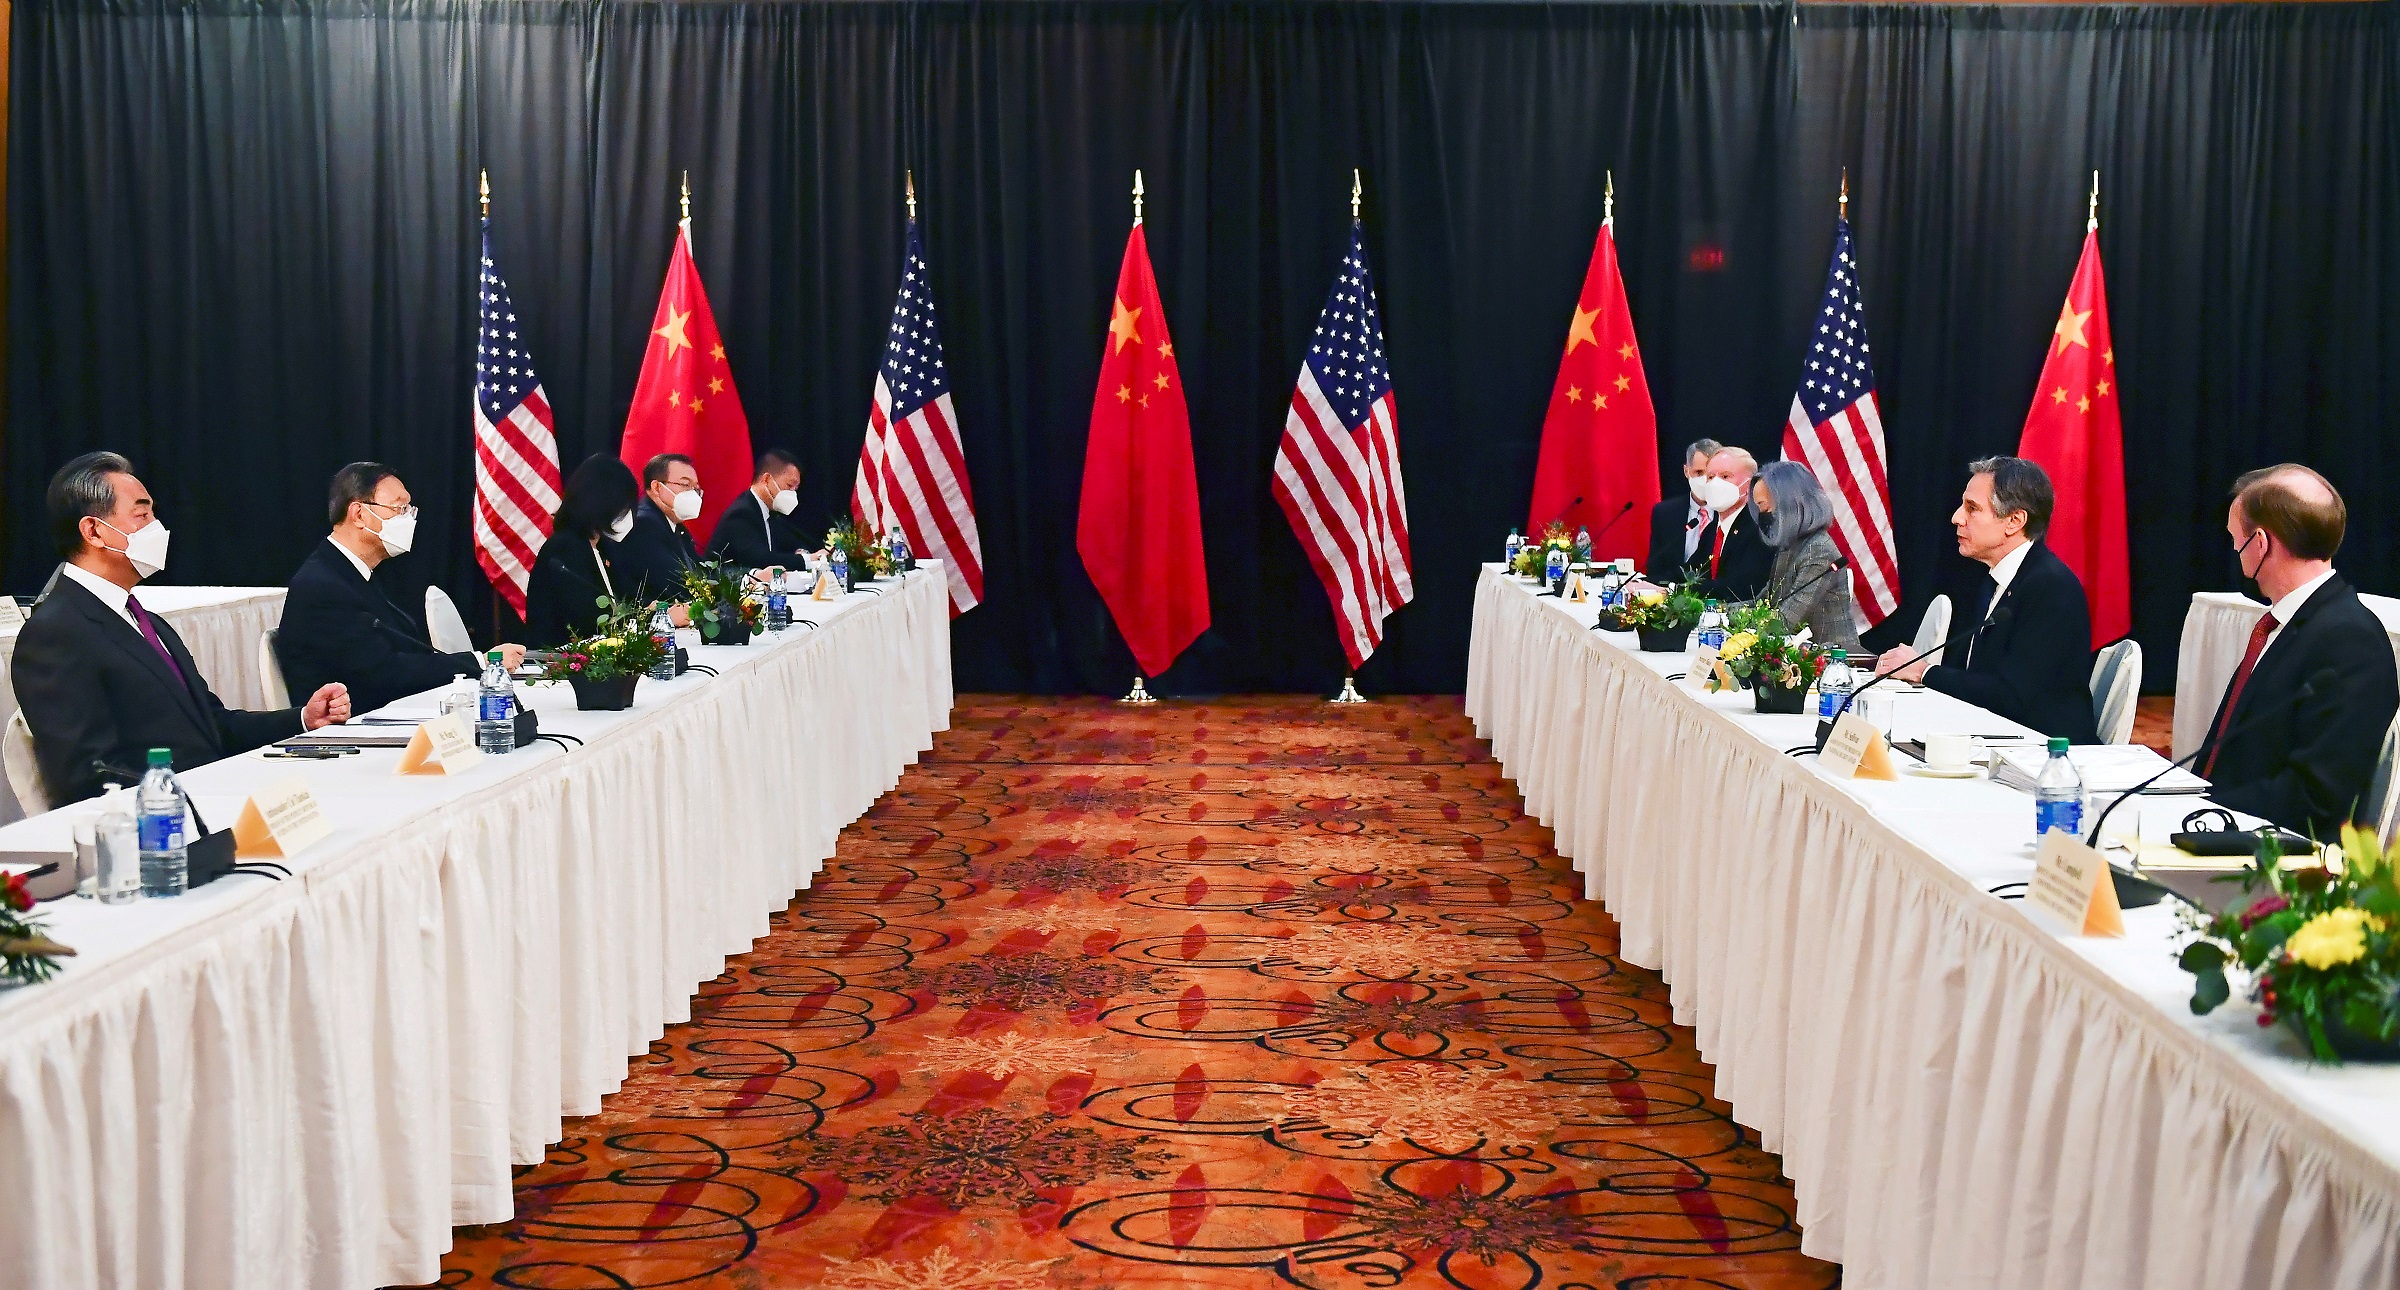 FILE PHOTO: U.S. Secretary of State Antony Blinken (2nd R), joined by National Security Advisor Jake Sullivan (R), speaks while facing Yang Jiechi (2nd L), director of the Central Foreign Affairs Commission Office, and Wang Yi (L), China's State Councilor and Foreign Minister, at the opening session of U.S.-China talks at the Captain Cook Hotel in Anchorage, Alaska, U.S. March 18, 2021. Frederic J. Brown/Pool via REUTERS/File Photo